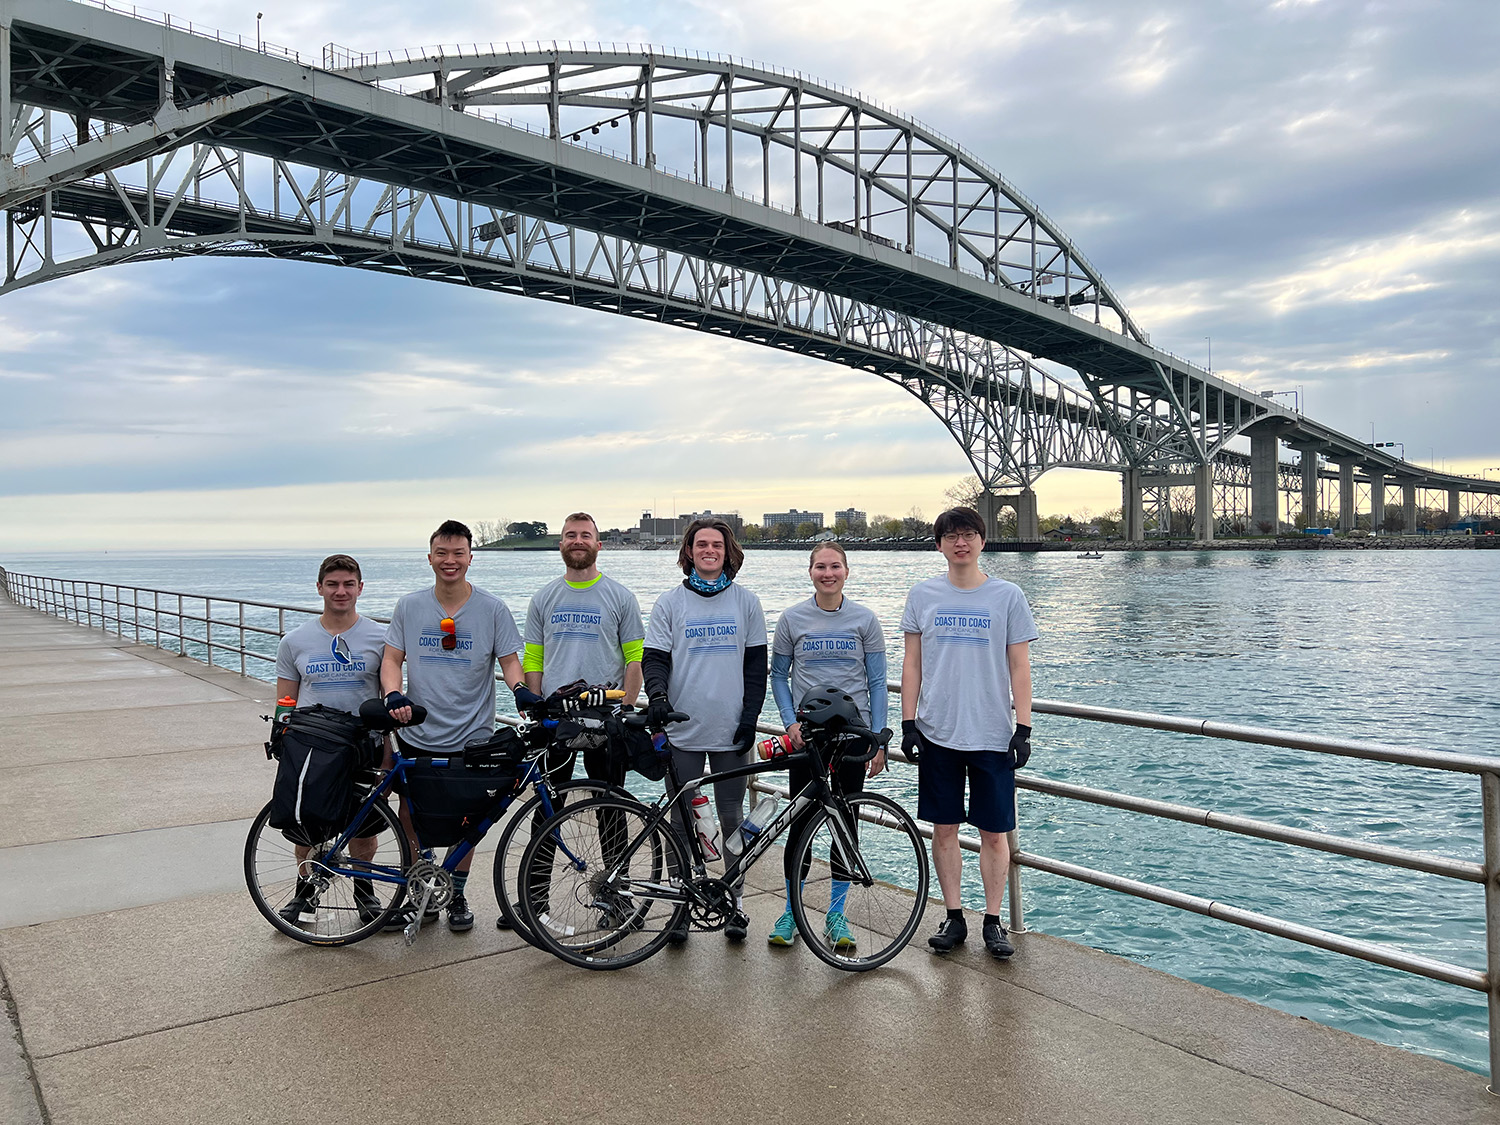 WMed students raise more than $4,000 for West Michigan Cancer Center with 300-mile ‘Coast to Coast for Cancer’ charity bike ride